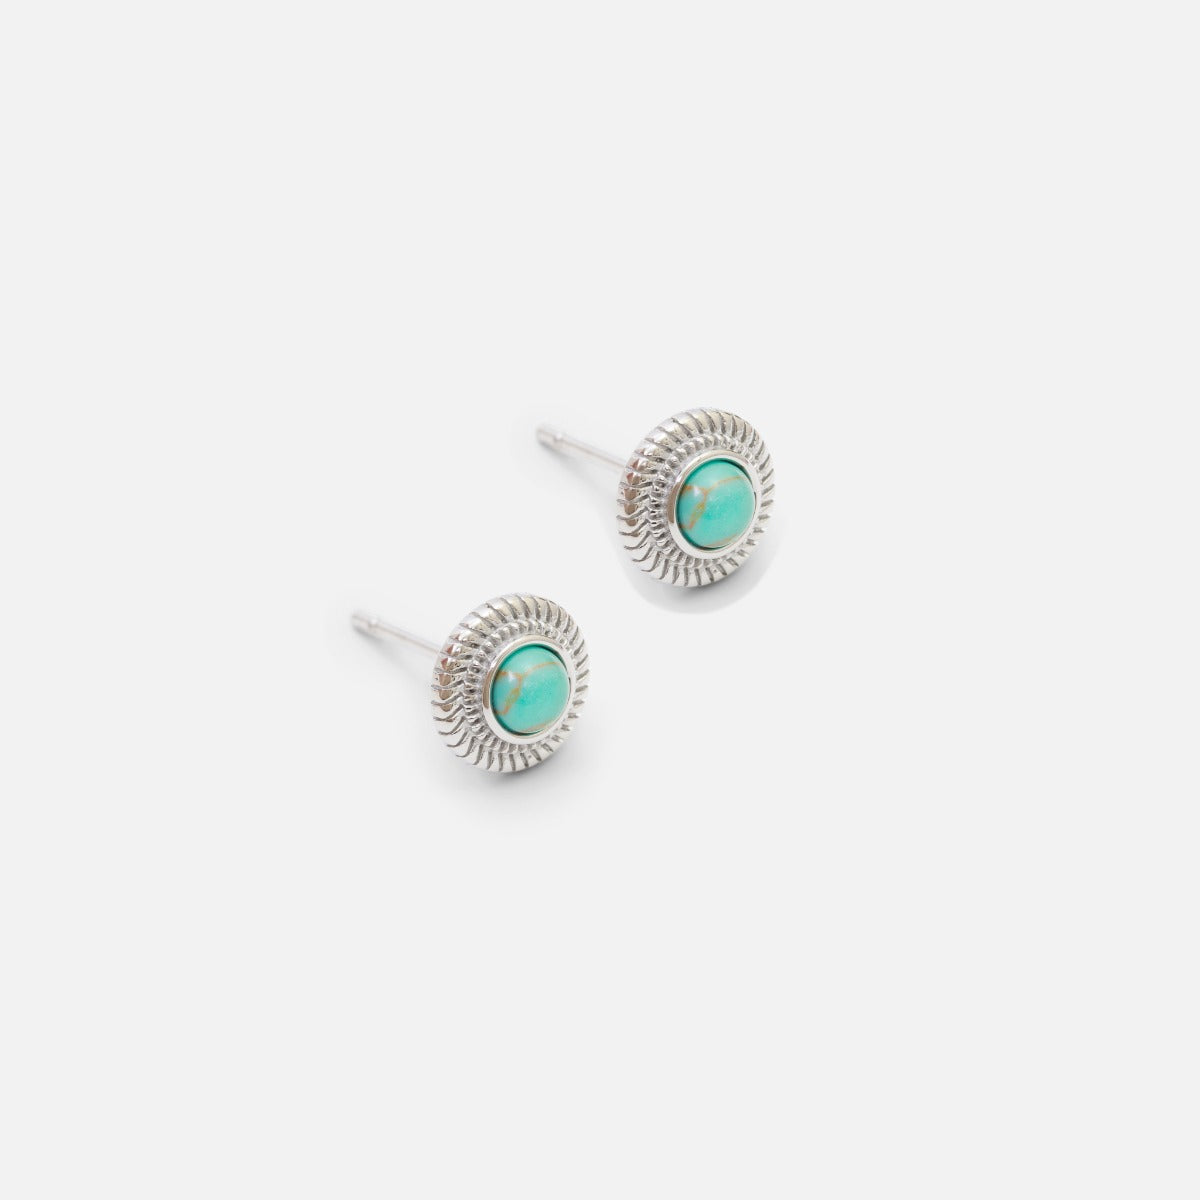 Turquoise stainless steel earrings with silvered outline